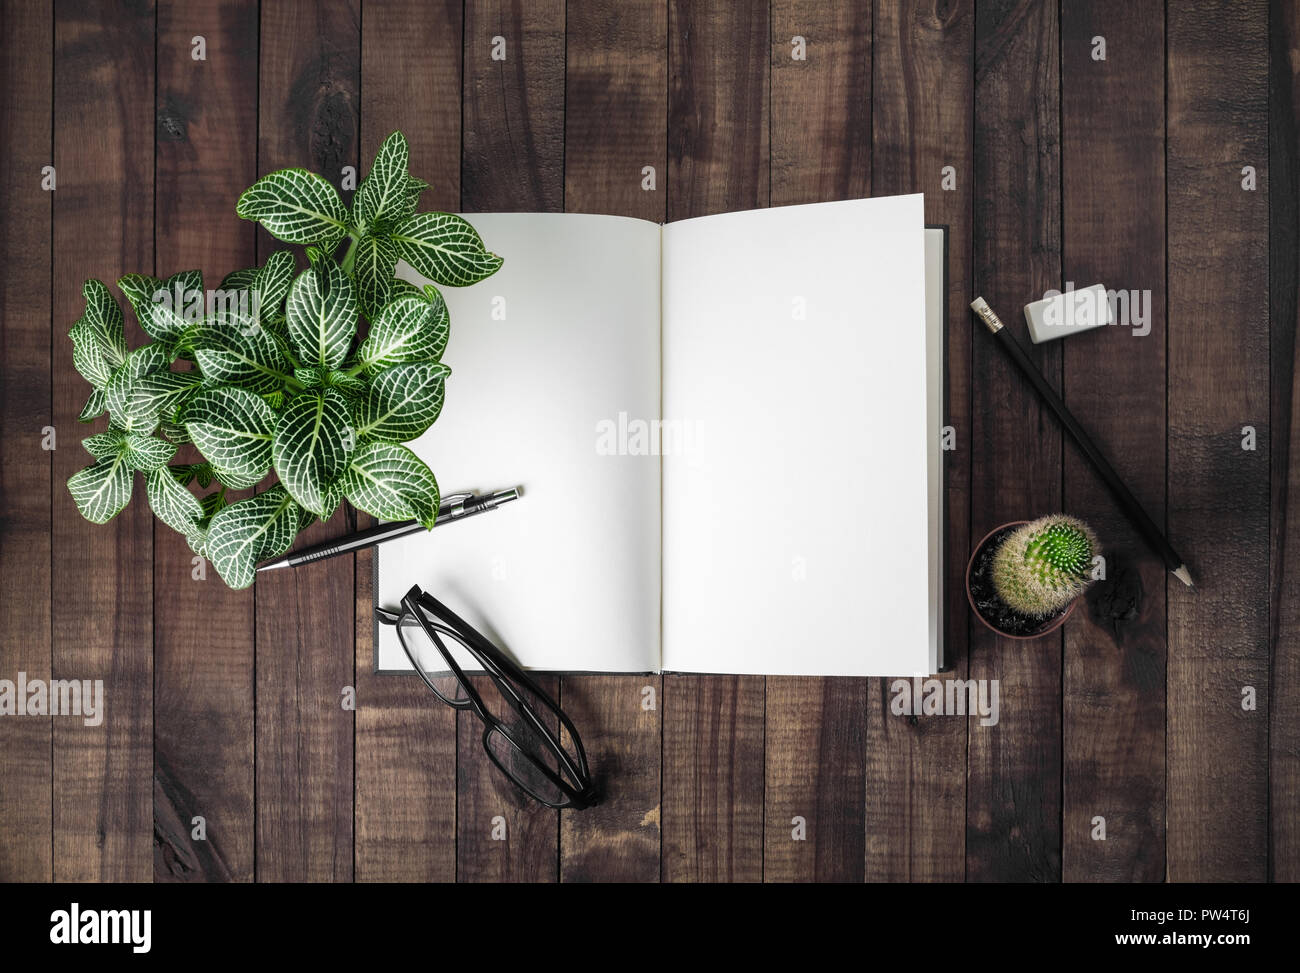 Blank open book, stationery and plants on wooden background. Flat lay. Stock Photo